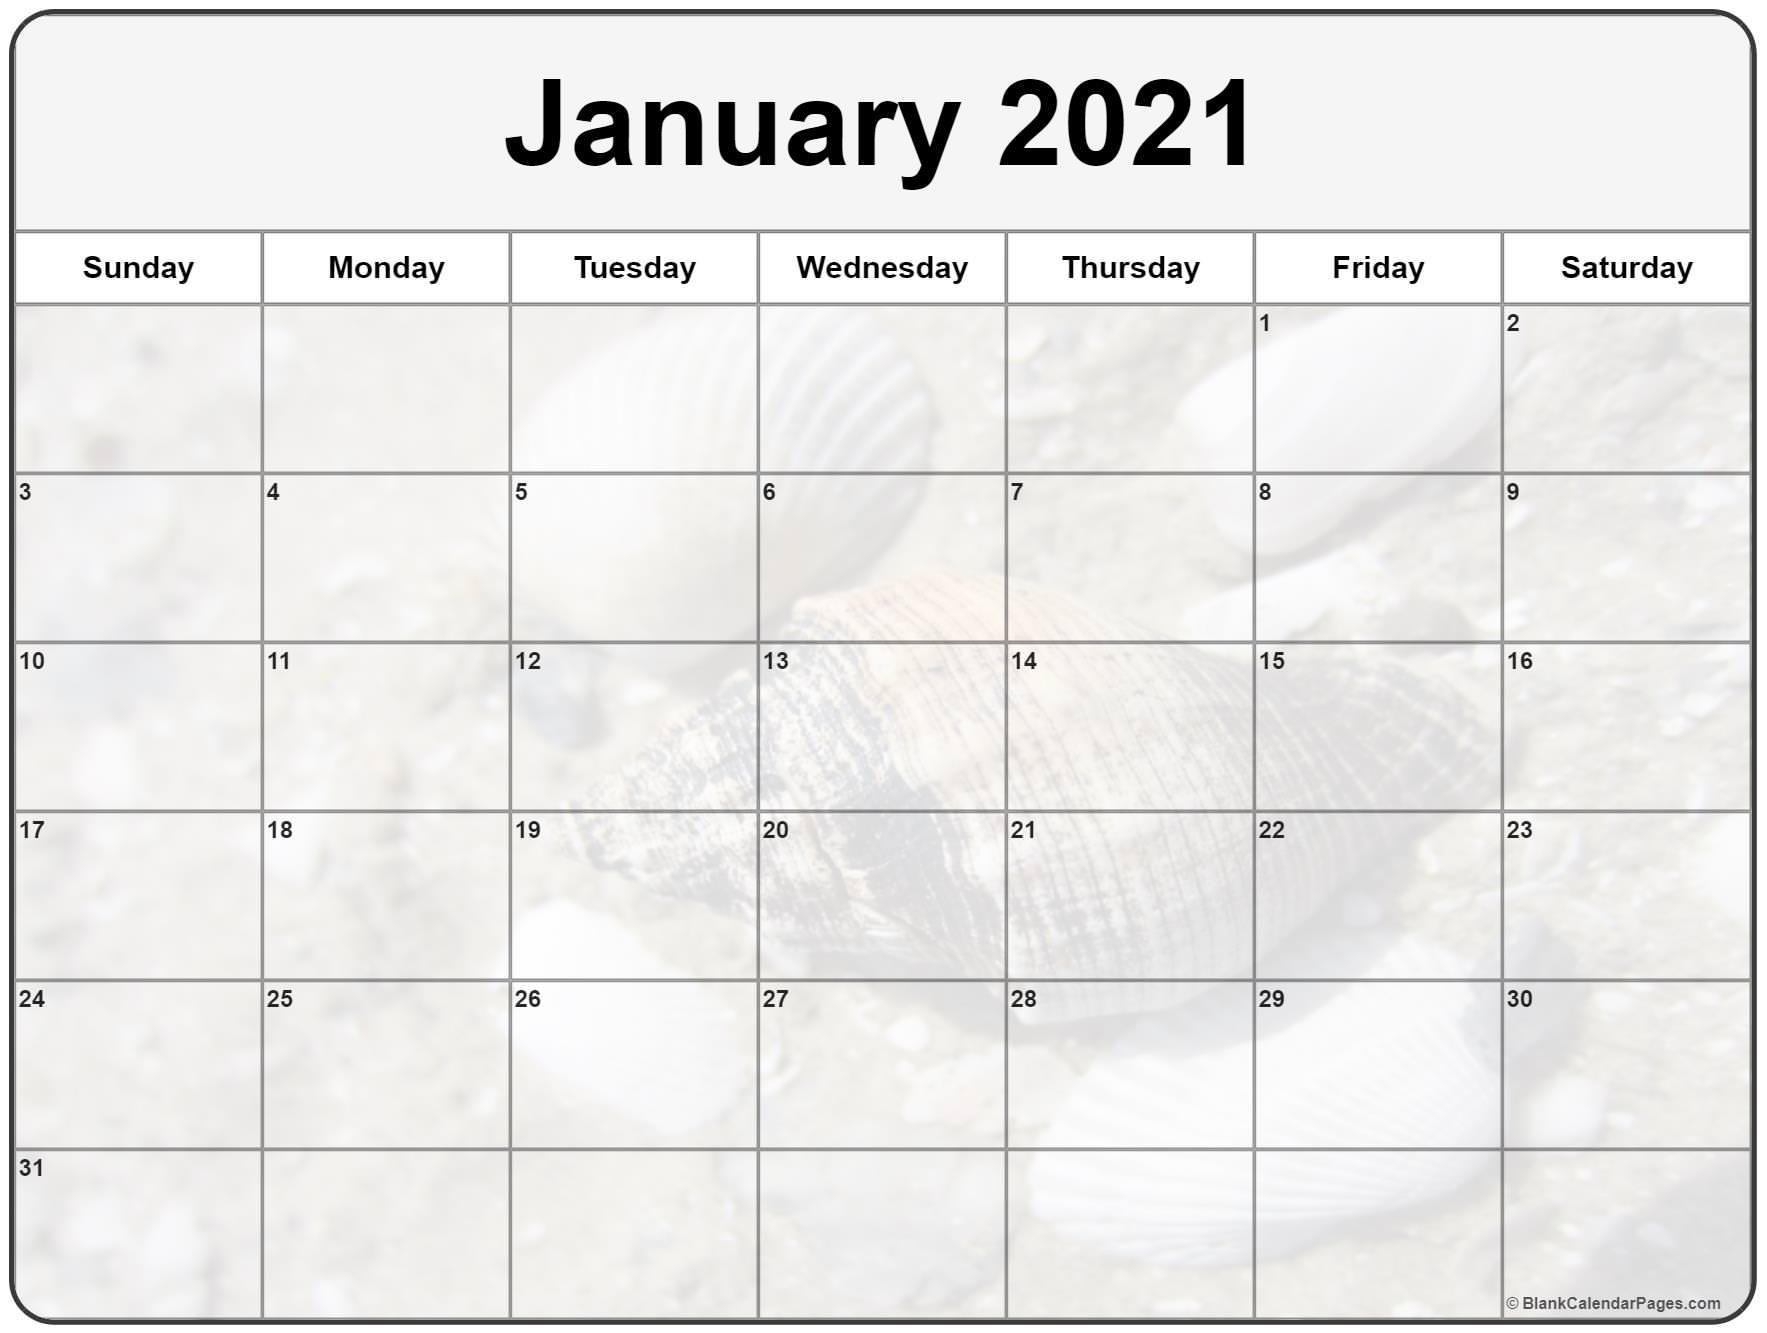 collection of january 2021 photo calendars with image filters